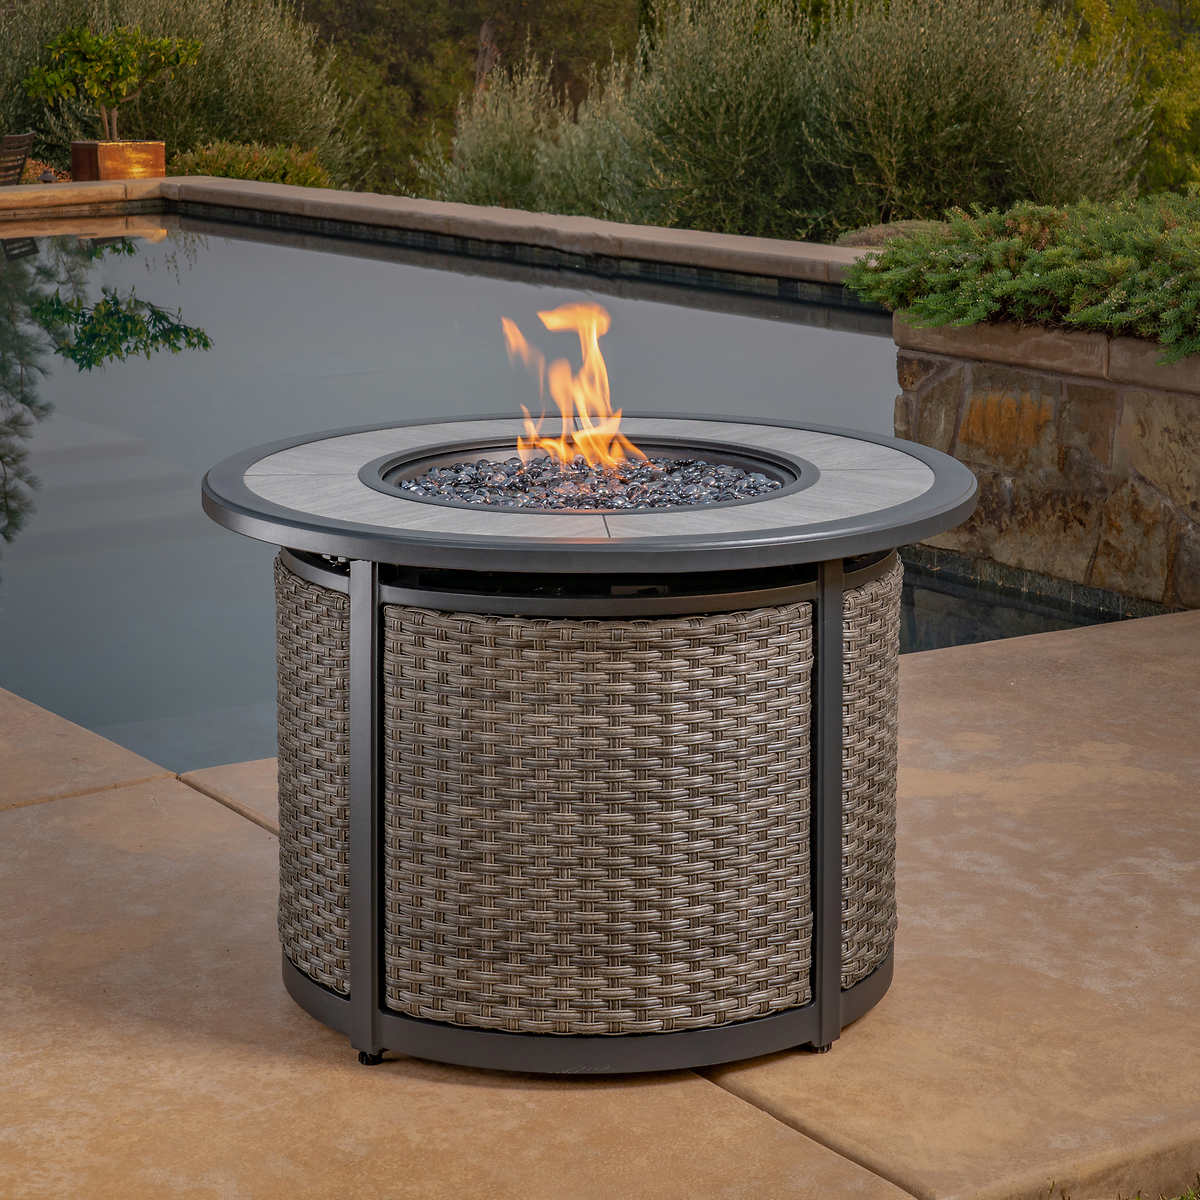 Madison Fire Pit Table Costco, How To Fire Pit